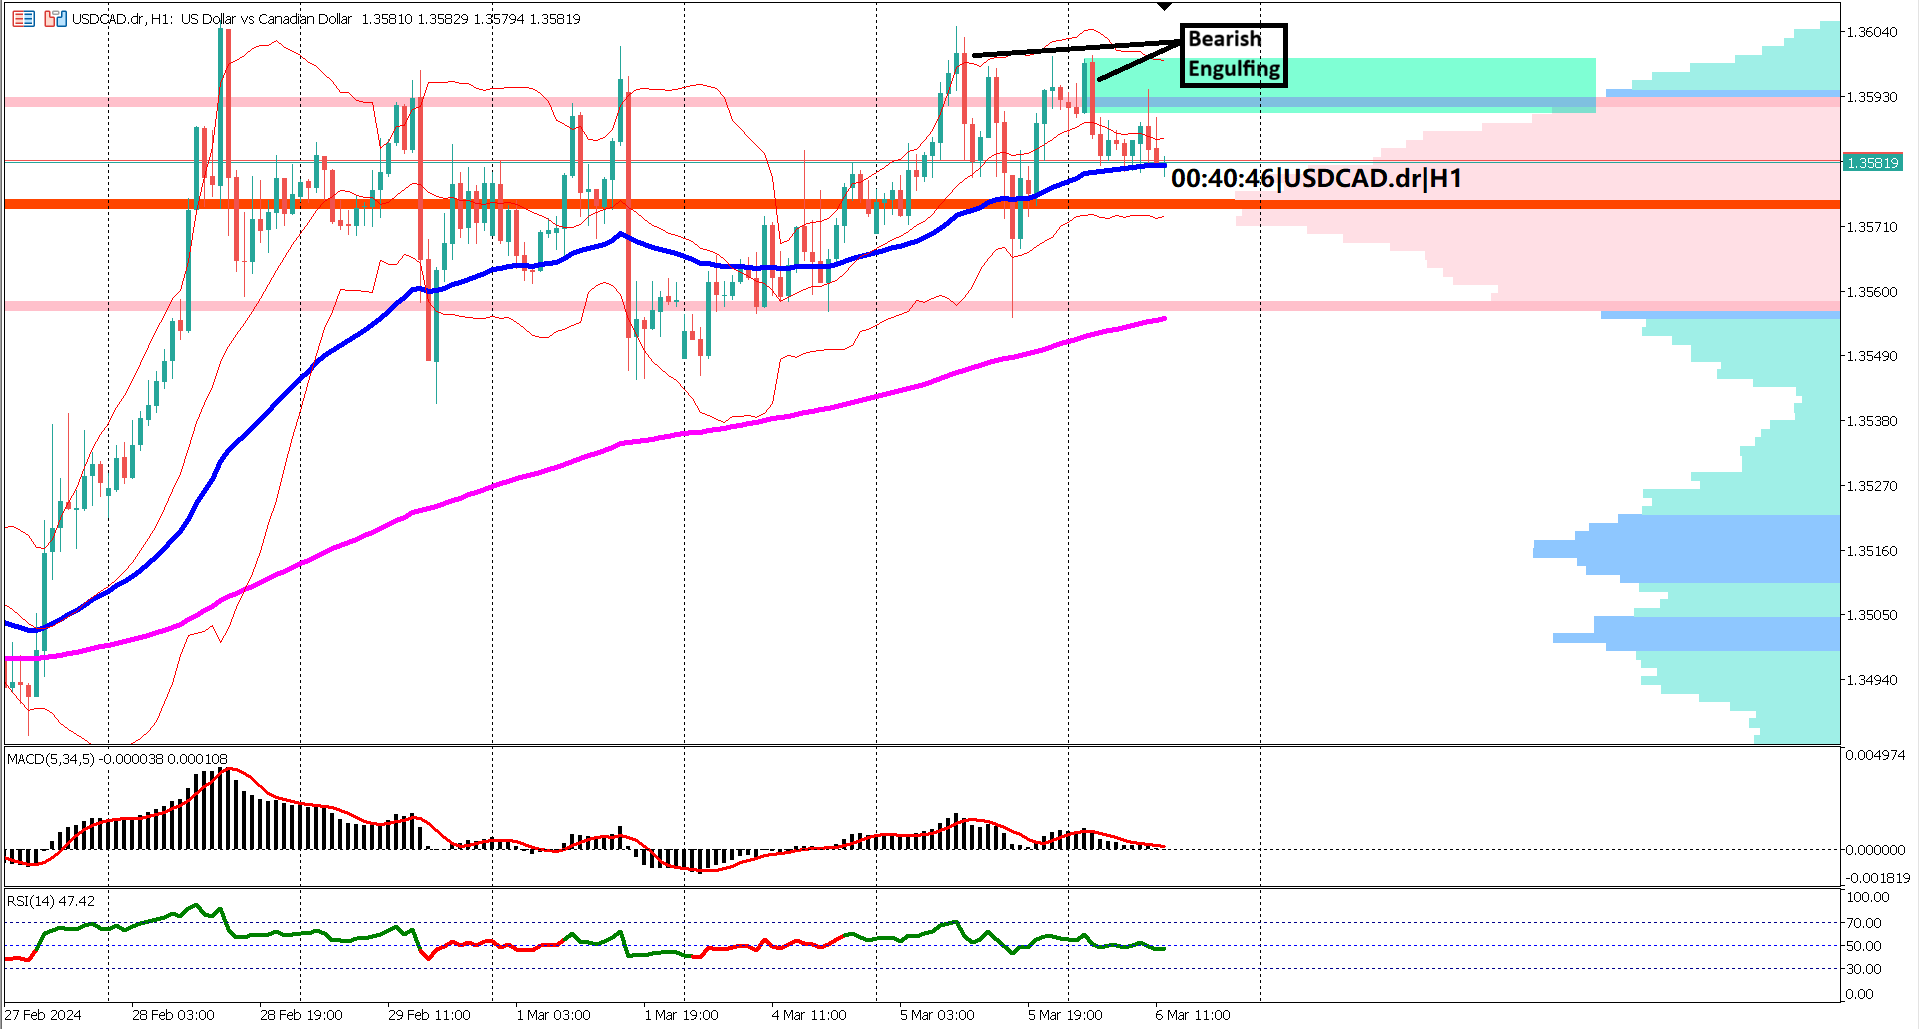 USDCAD Prepares for BoC Decision: Analyzing Technical Indicators